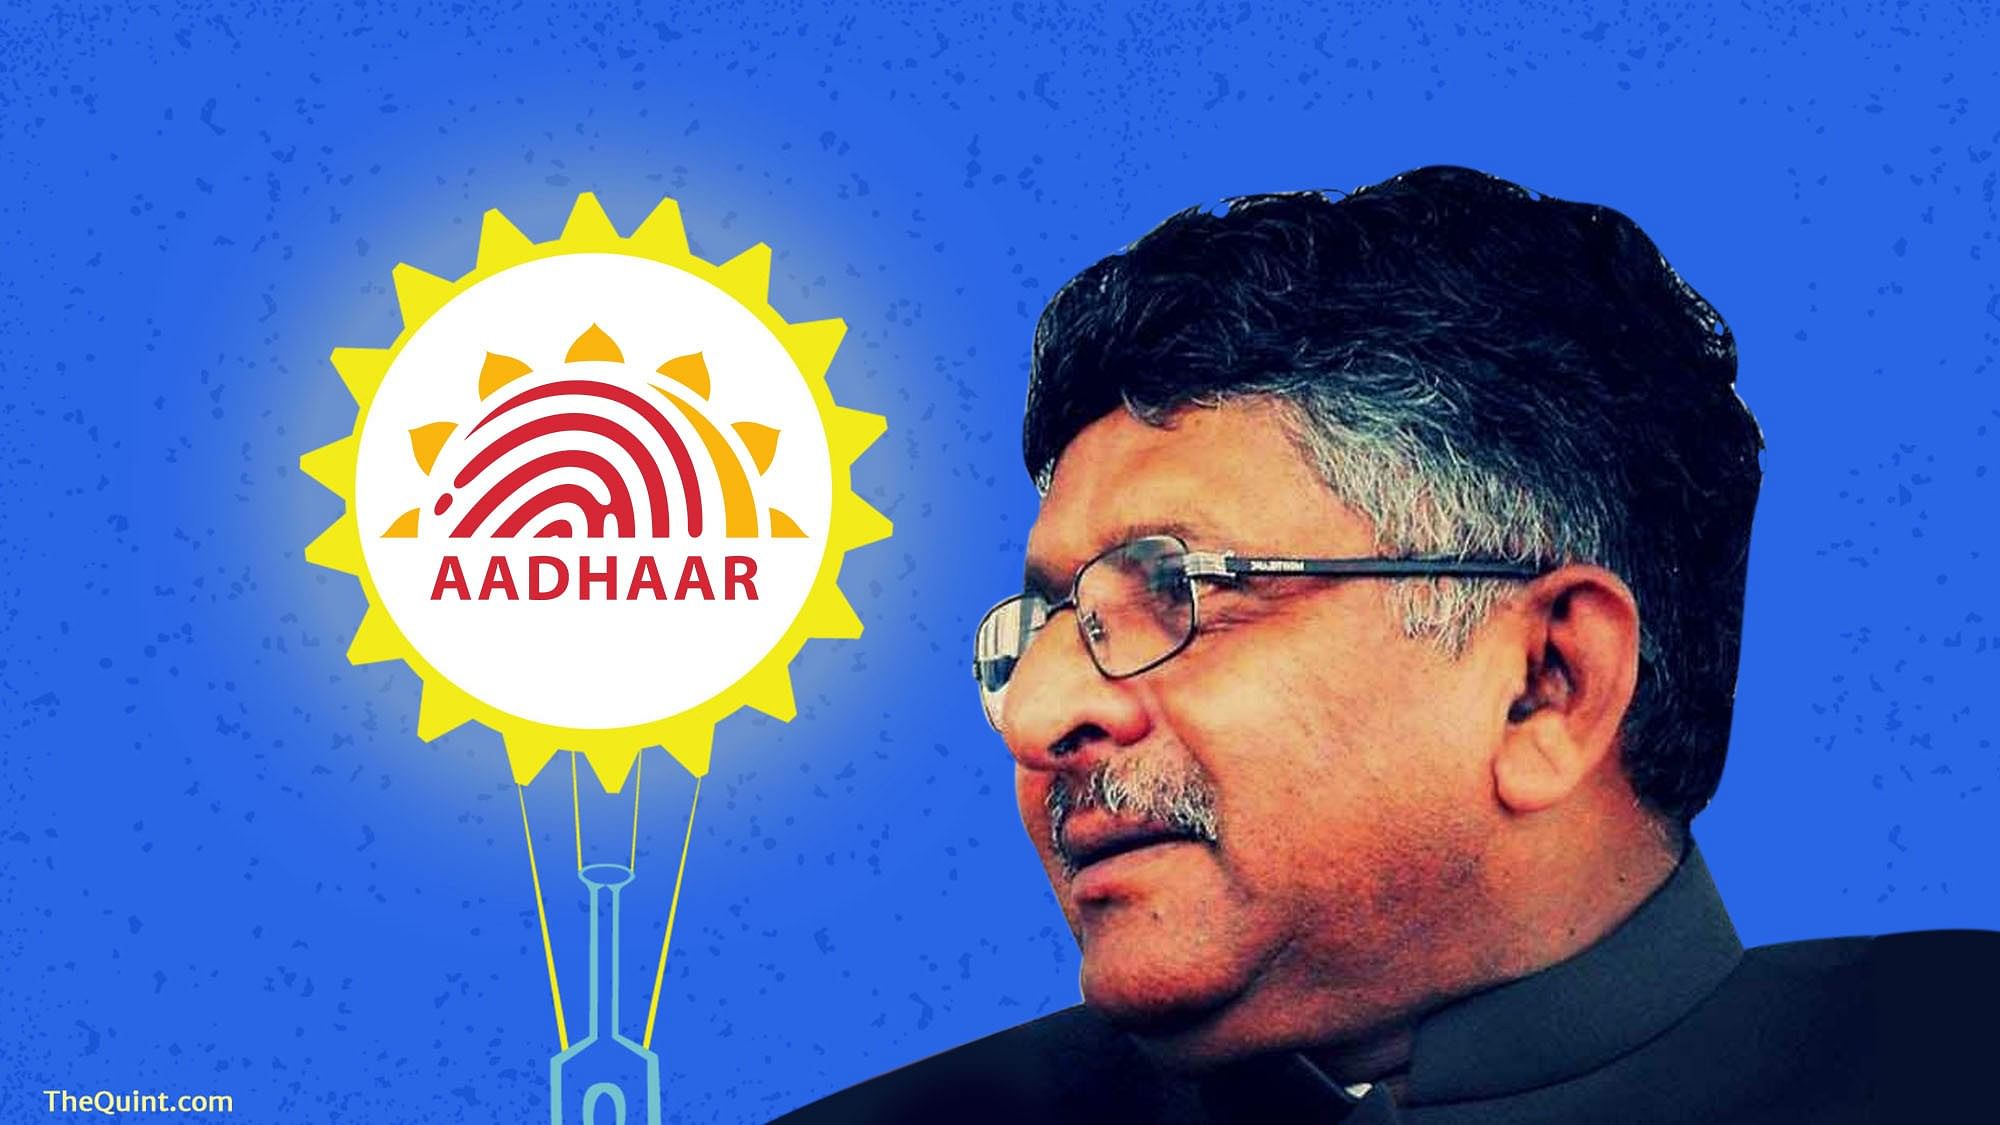 Union Minister Ravi Shankar Prasad had said that linking mobile numbers to Aadhaar was directed by the Supreme Court of India